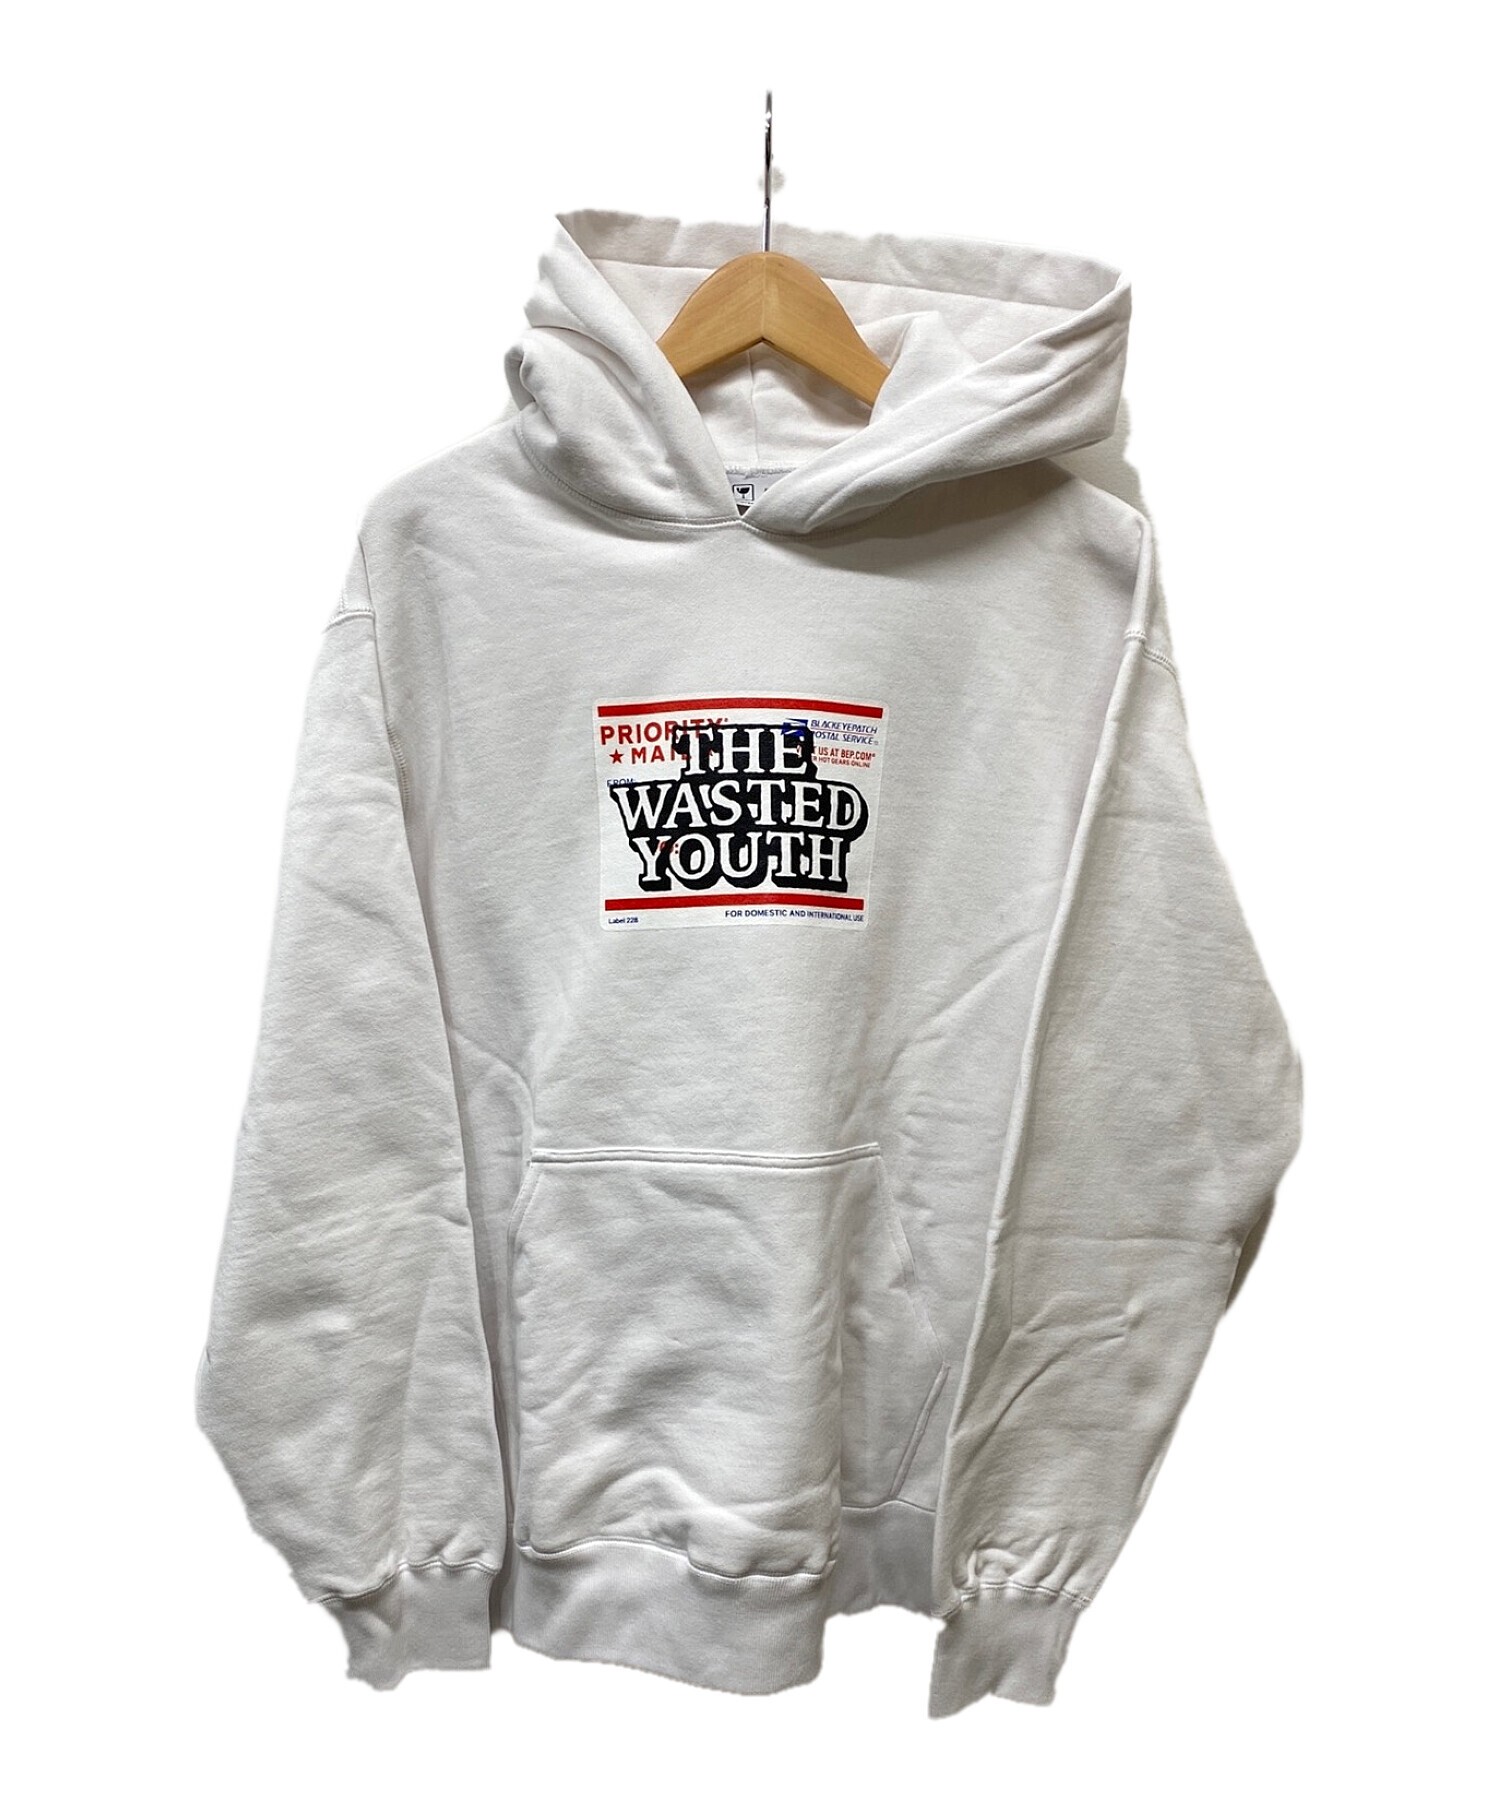 BlackEyePatch x Wasted Youth HOODIE L-